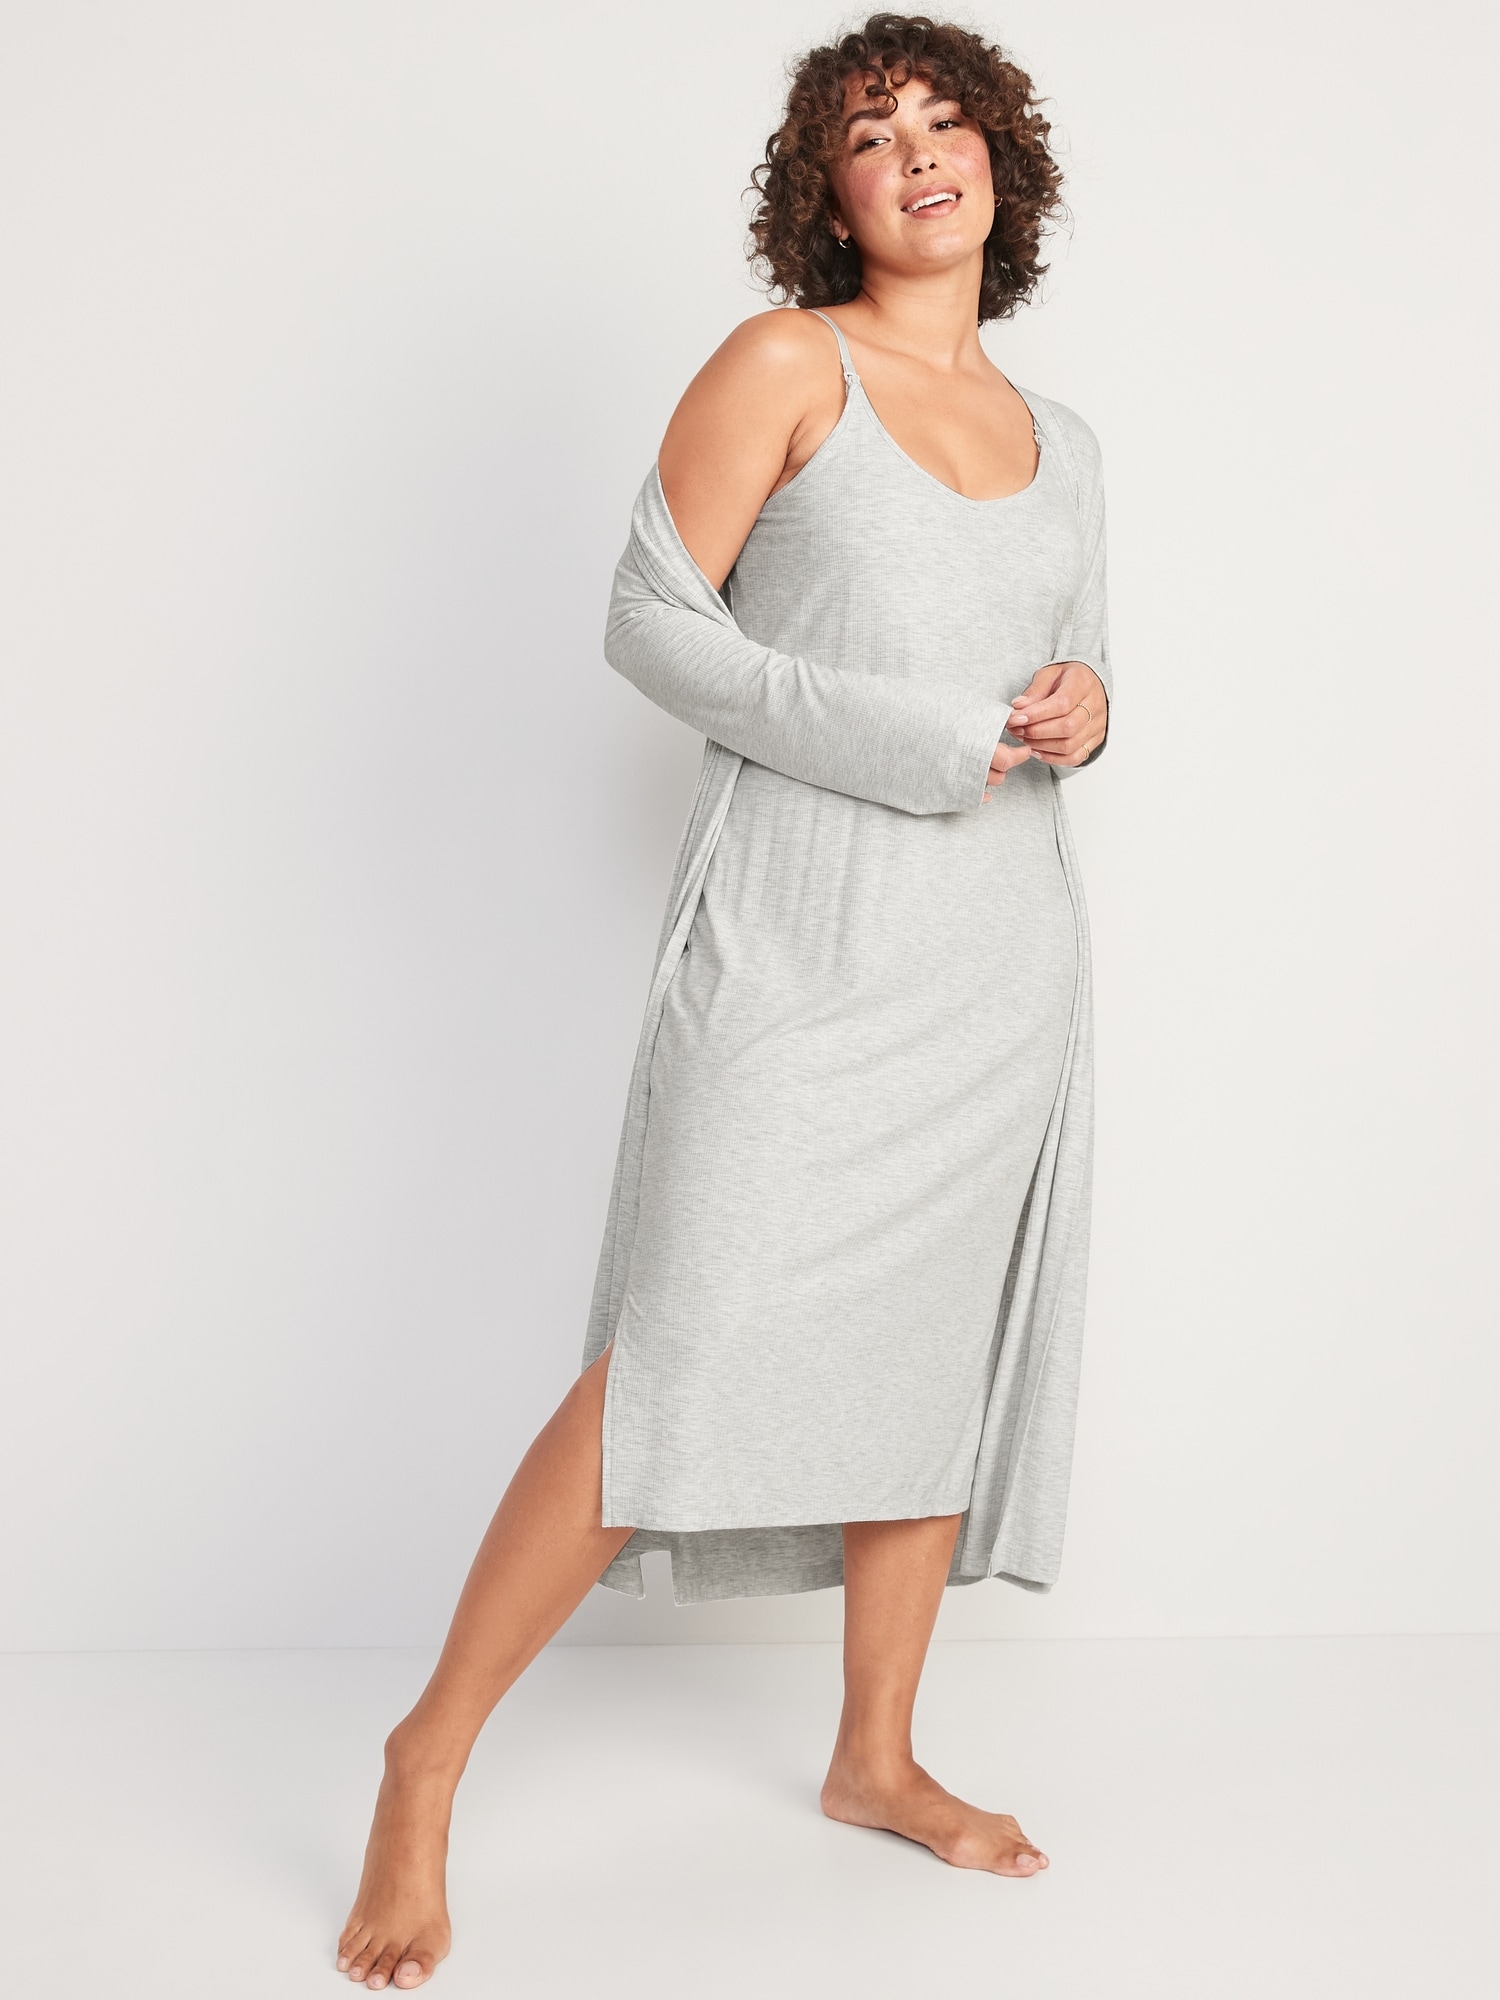 Maternity 2-Piece Nursing Chemise and Robe Set -- Available in Plus Size 